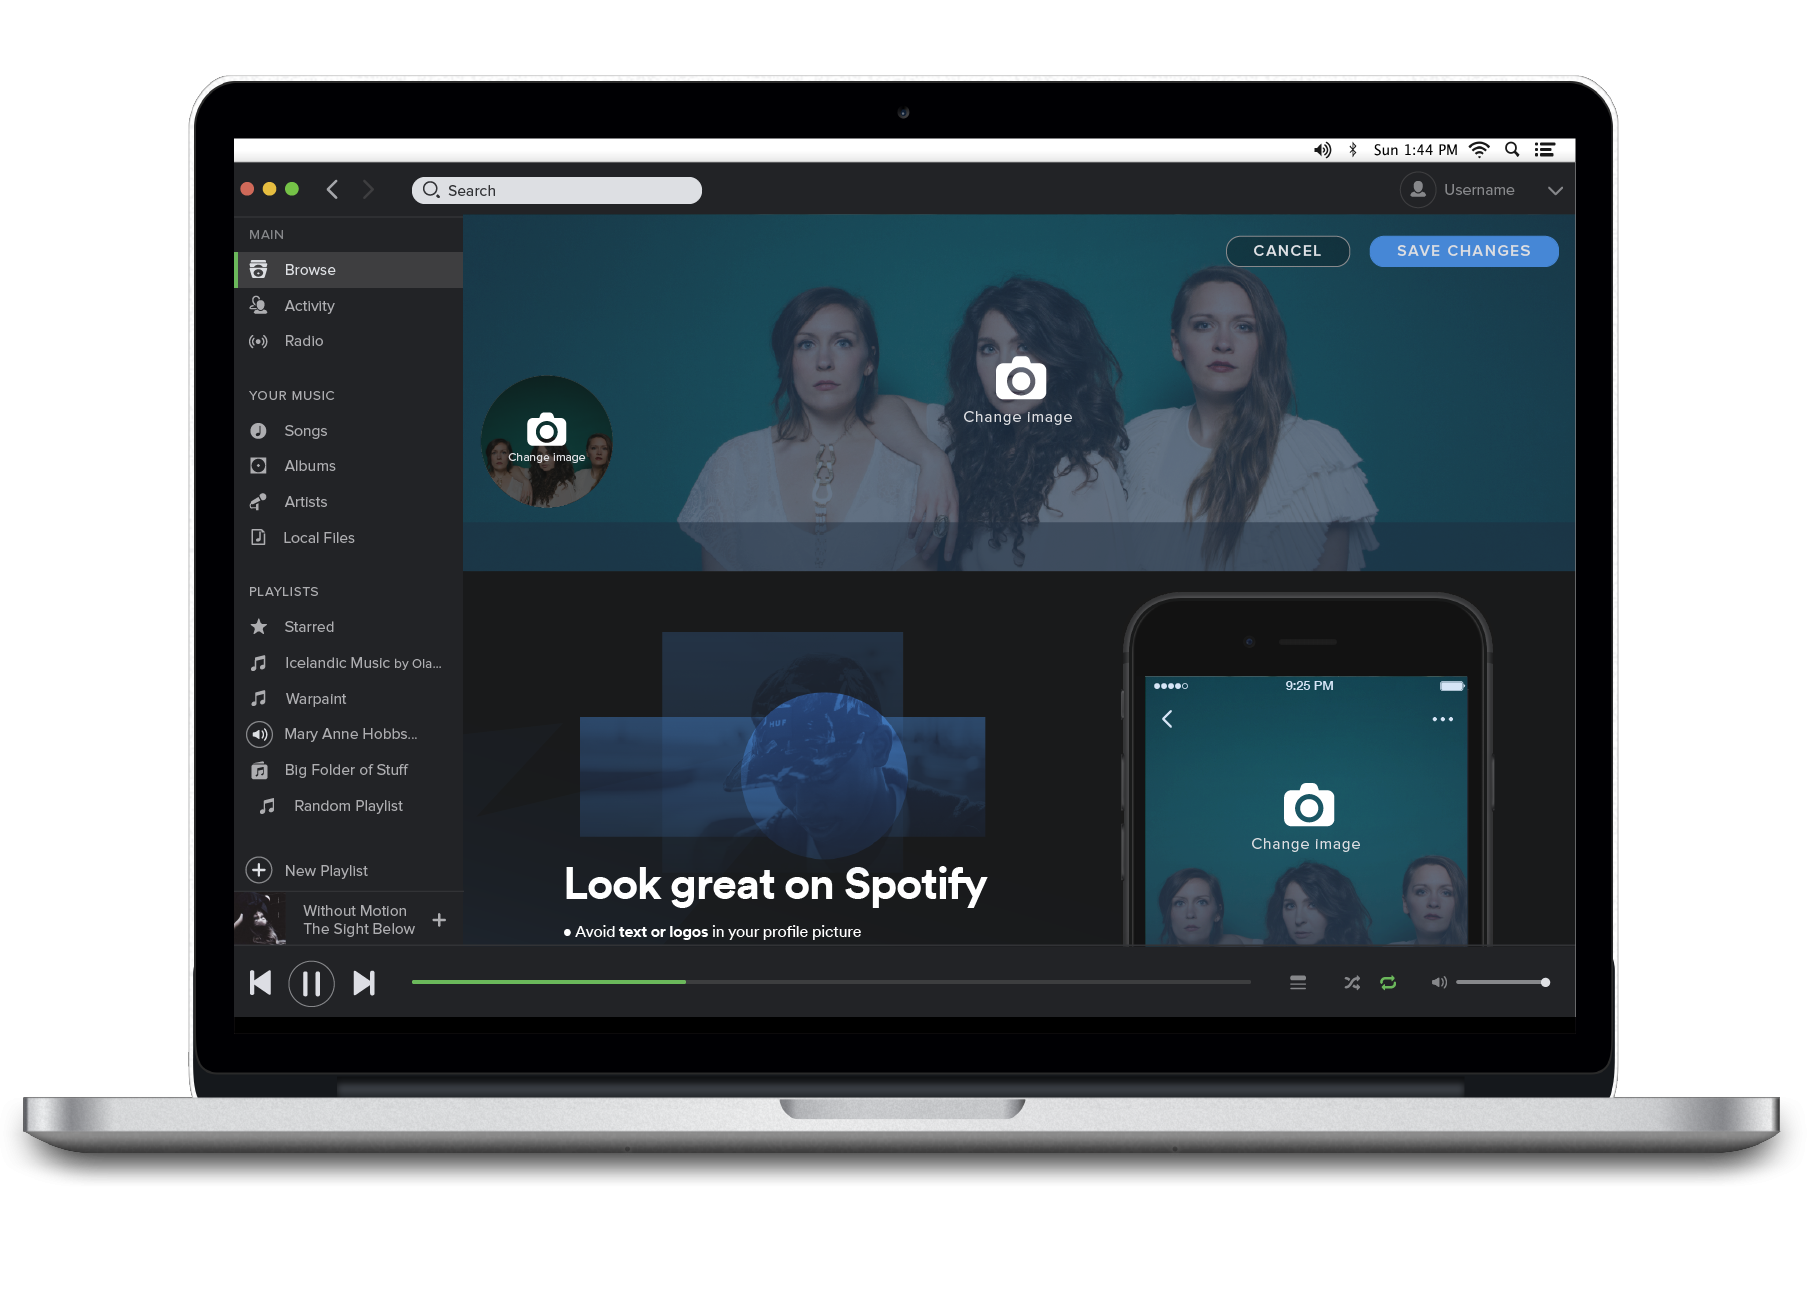 Independent artists can now change Spotify Artist Profile images directly from the music streaming service’s desktop app